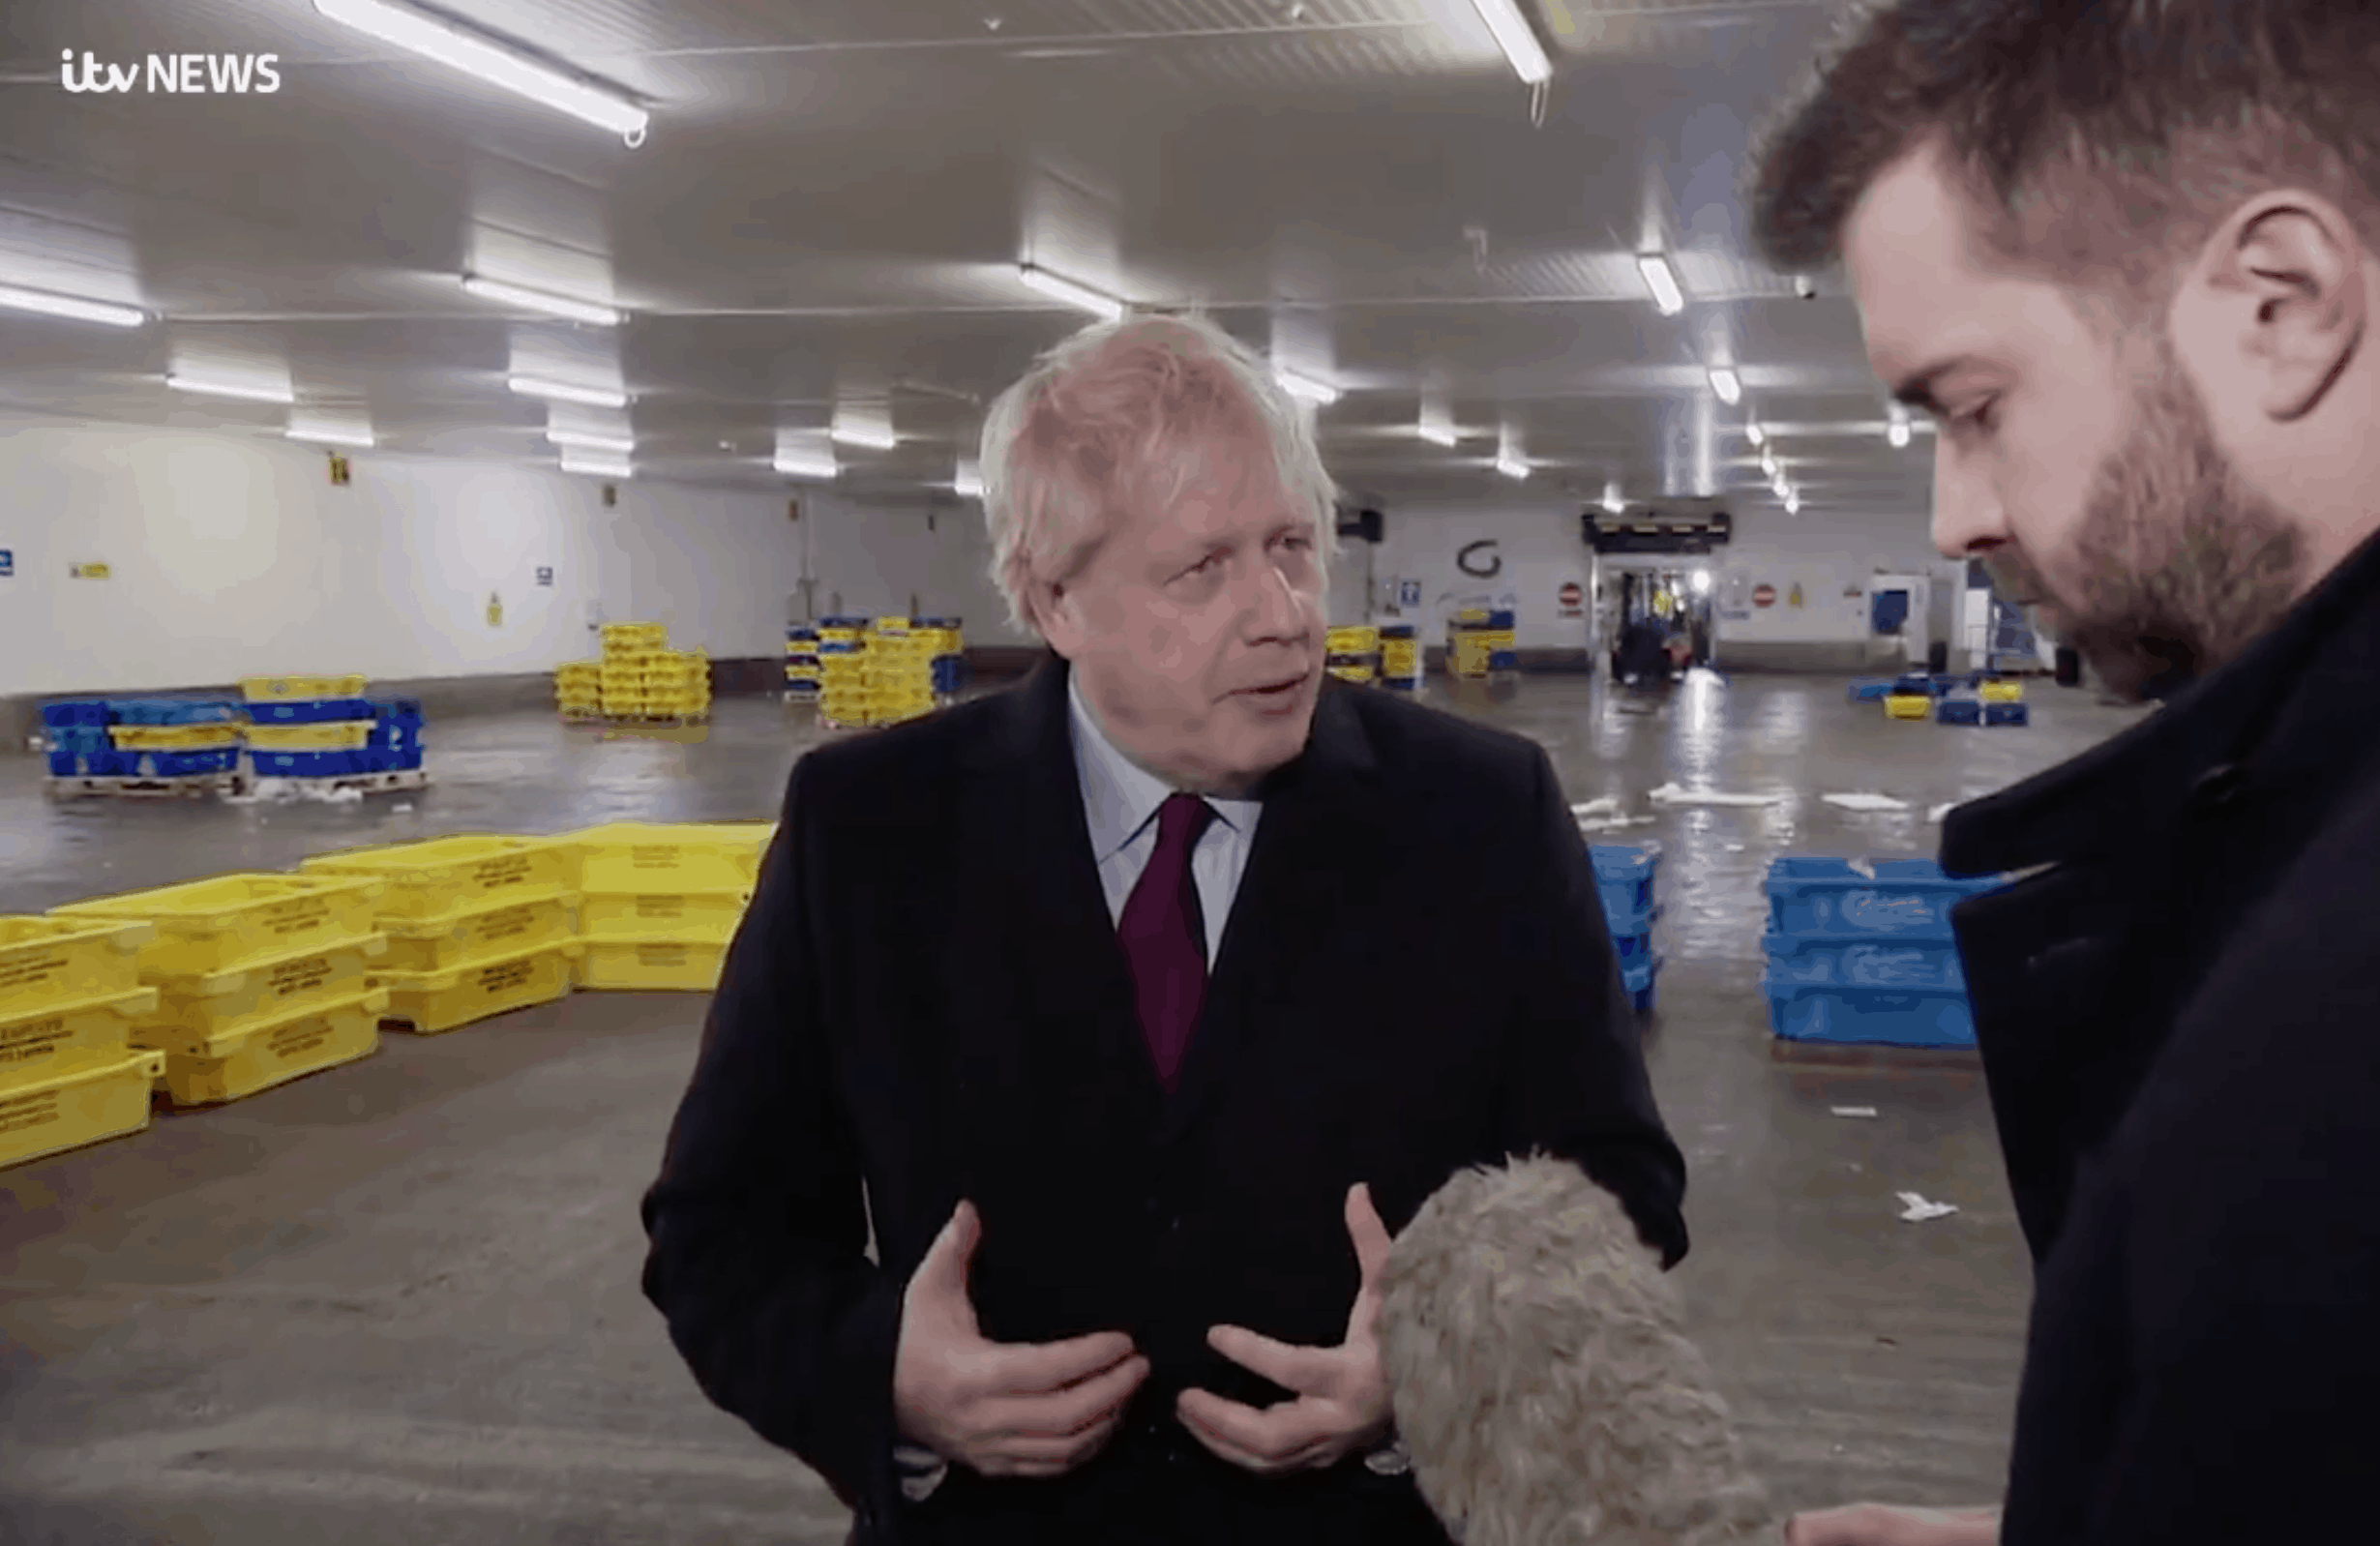 Boris Johnson snatches reporter’s phone after refusing to look at child asleep on hospital floor